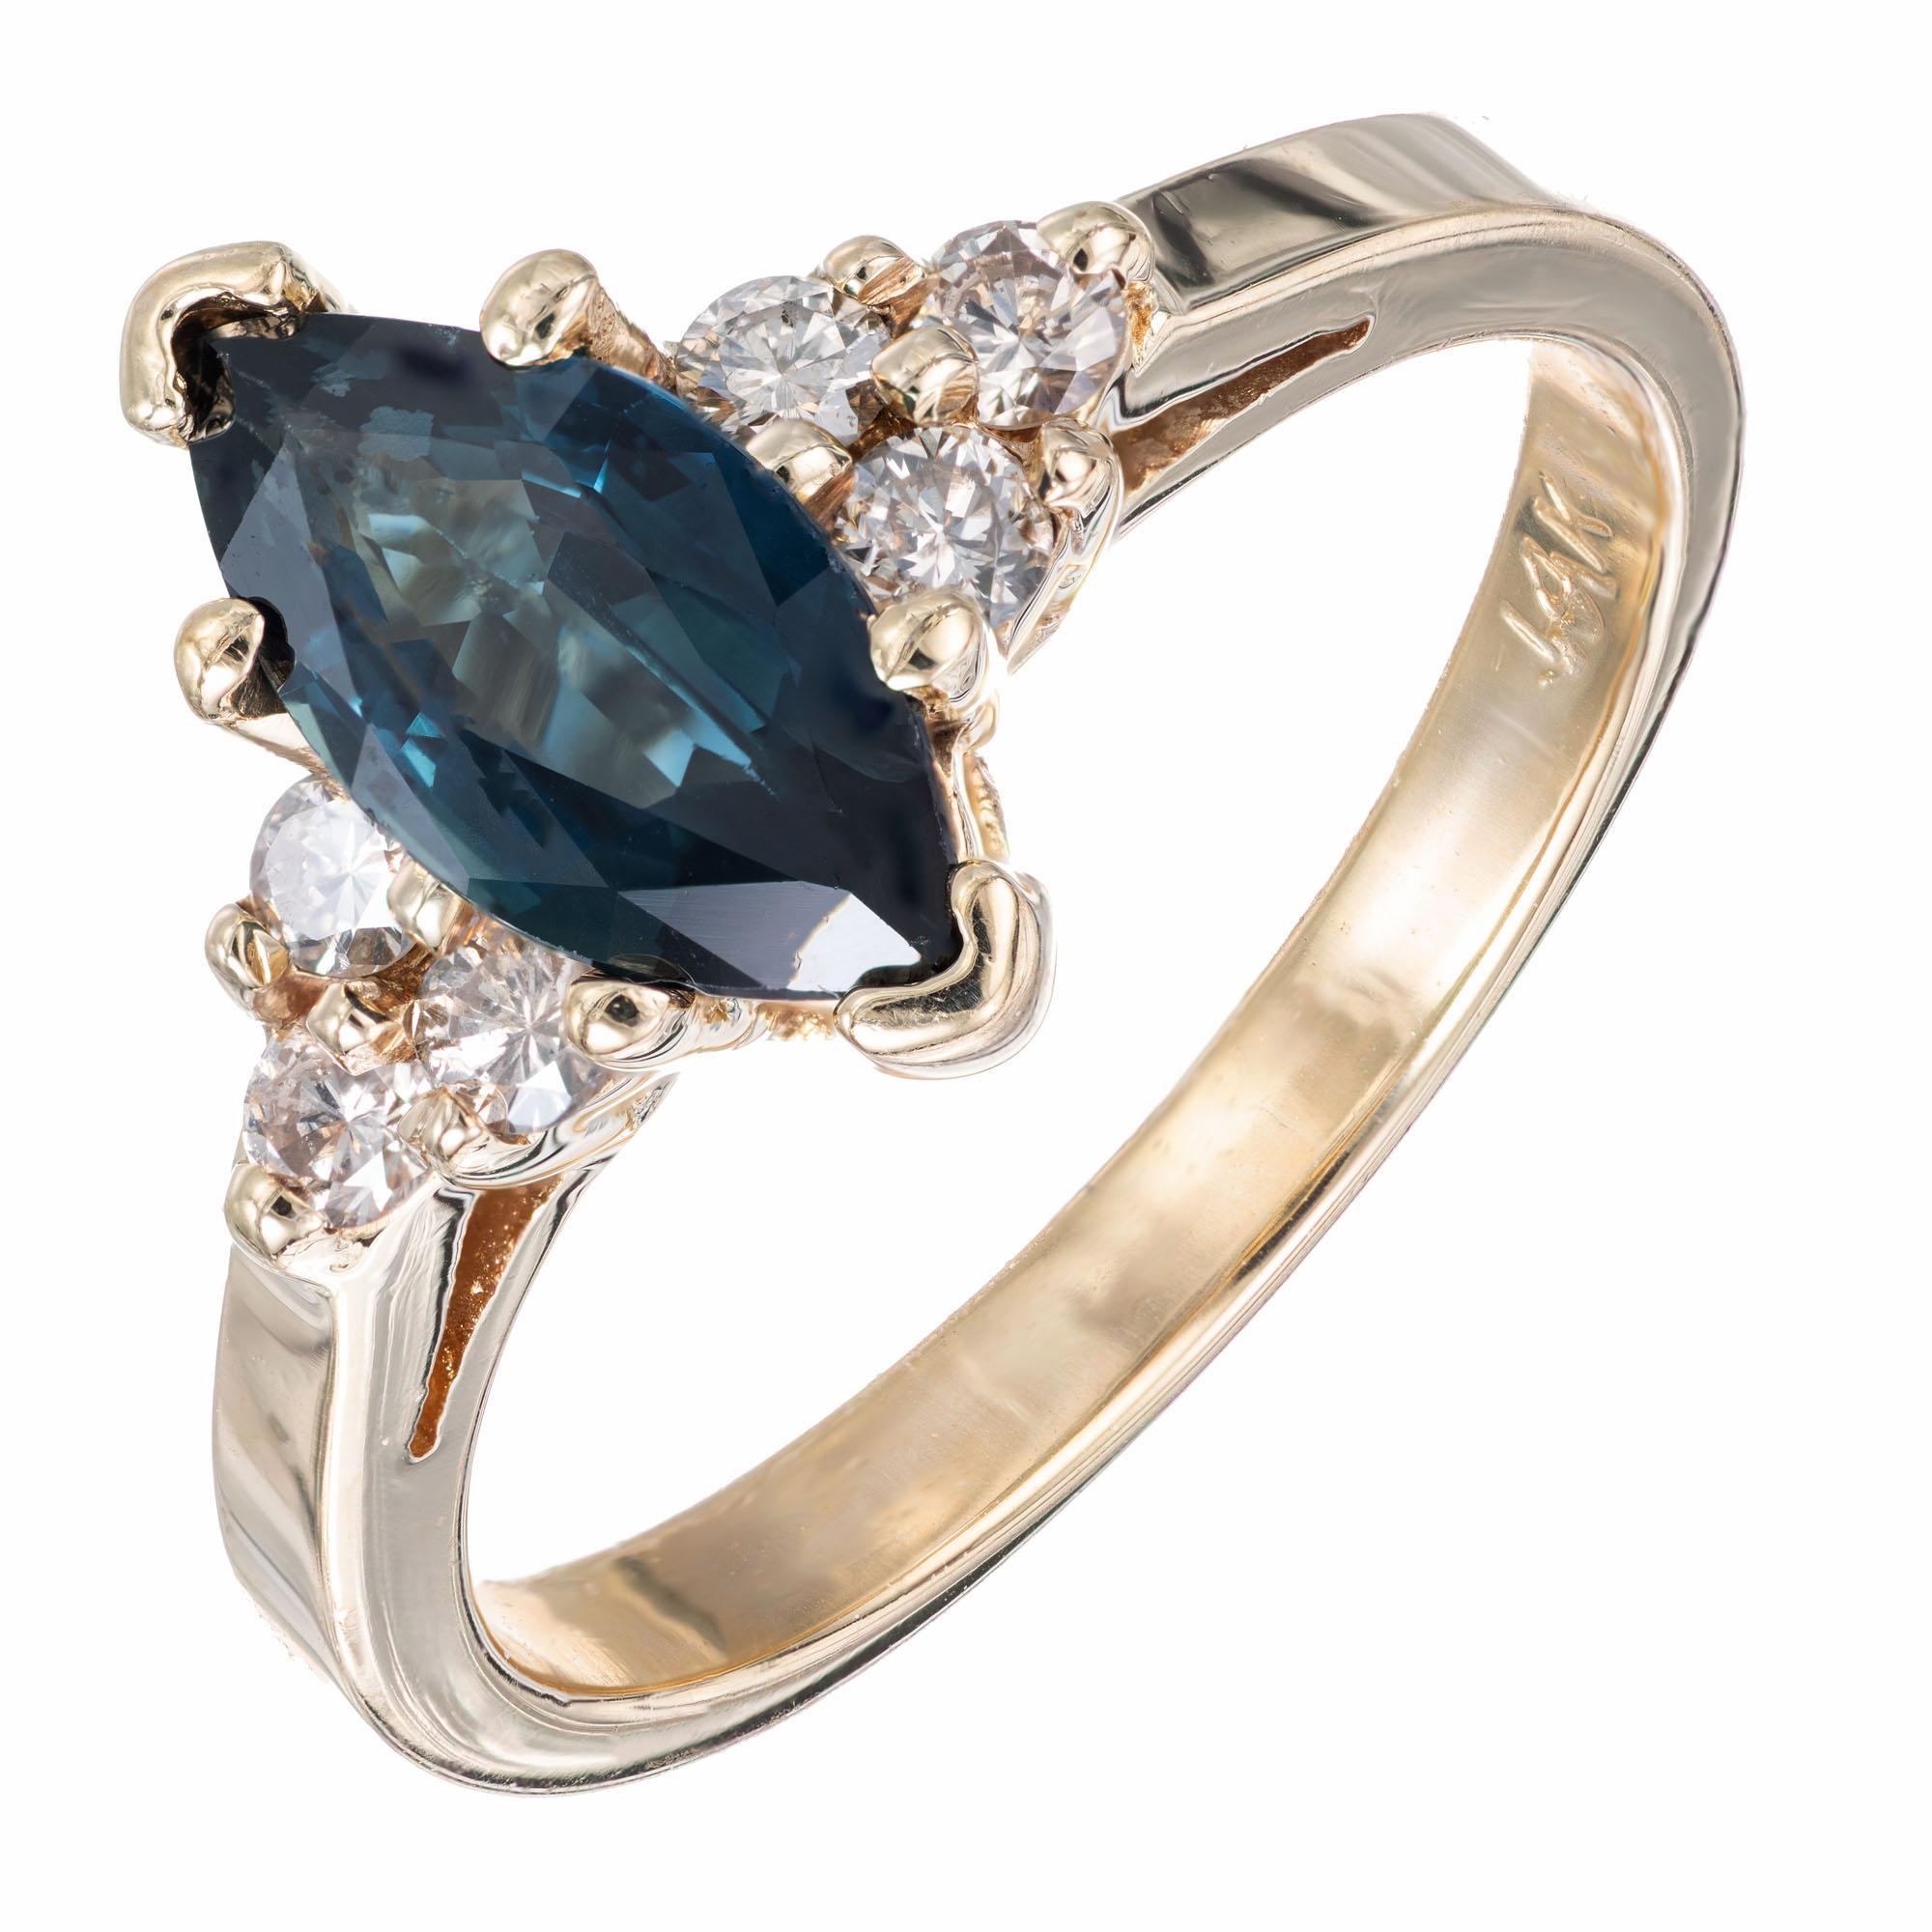 Sapphire and diamond engagement ring. 1.00 carat marquise center sapphire set in a 14k yellow gold setting with 6 accent diamonds.  

1 marquise cut blue sapphire, SI approx. 1.00ct
6 round diamonds, J-K SI approx. .18cts
Size 5.75 and sizable 
14k